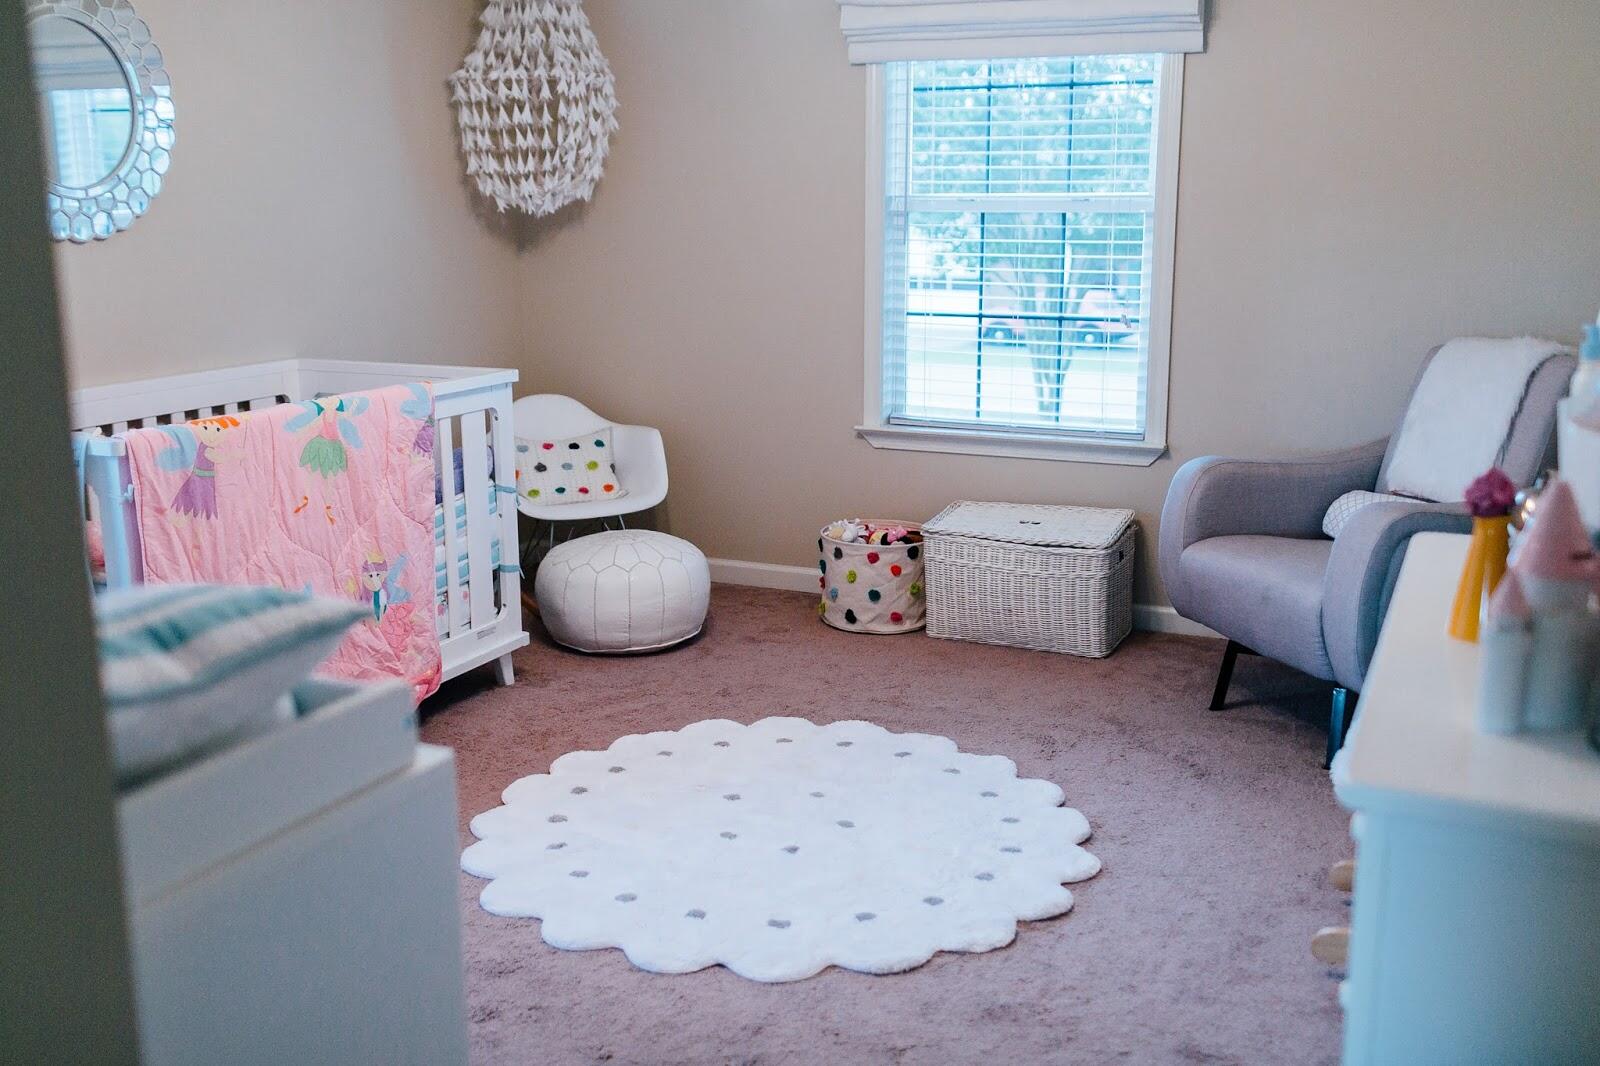 How to Choose a Rug for Your Child's Room by lifestyle blogger Laura of Walking in Memphis in High Heels